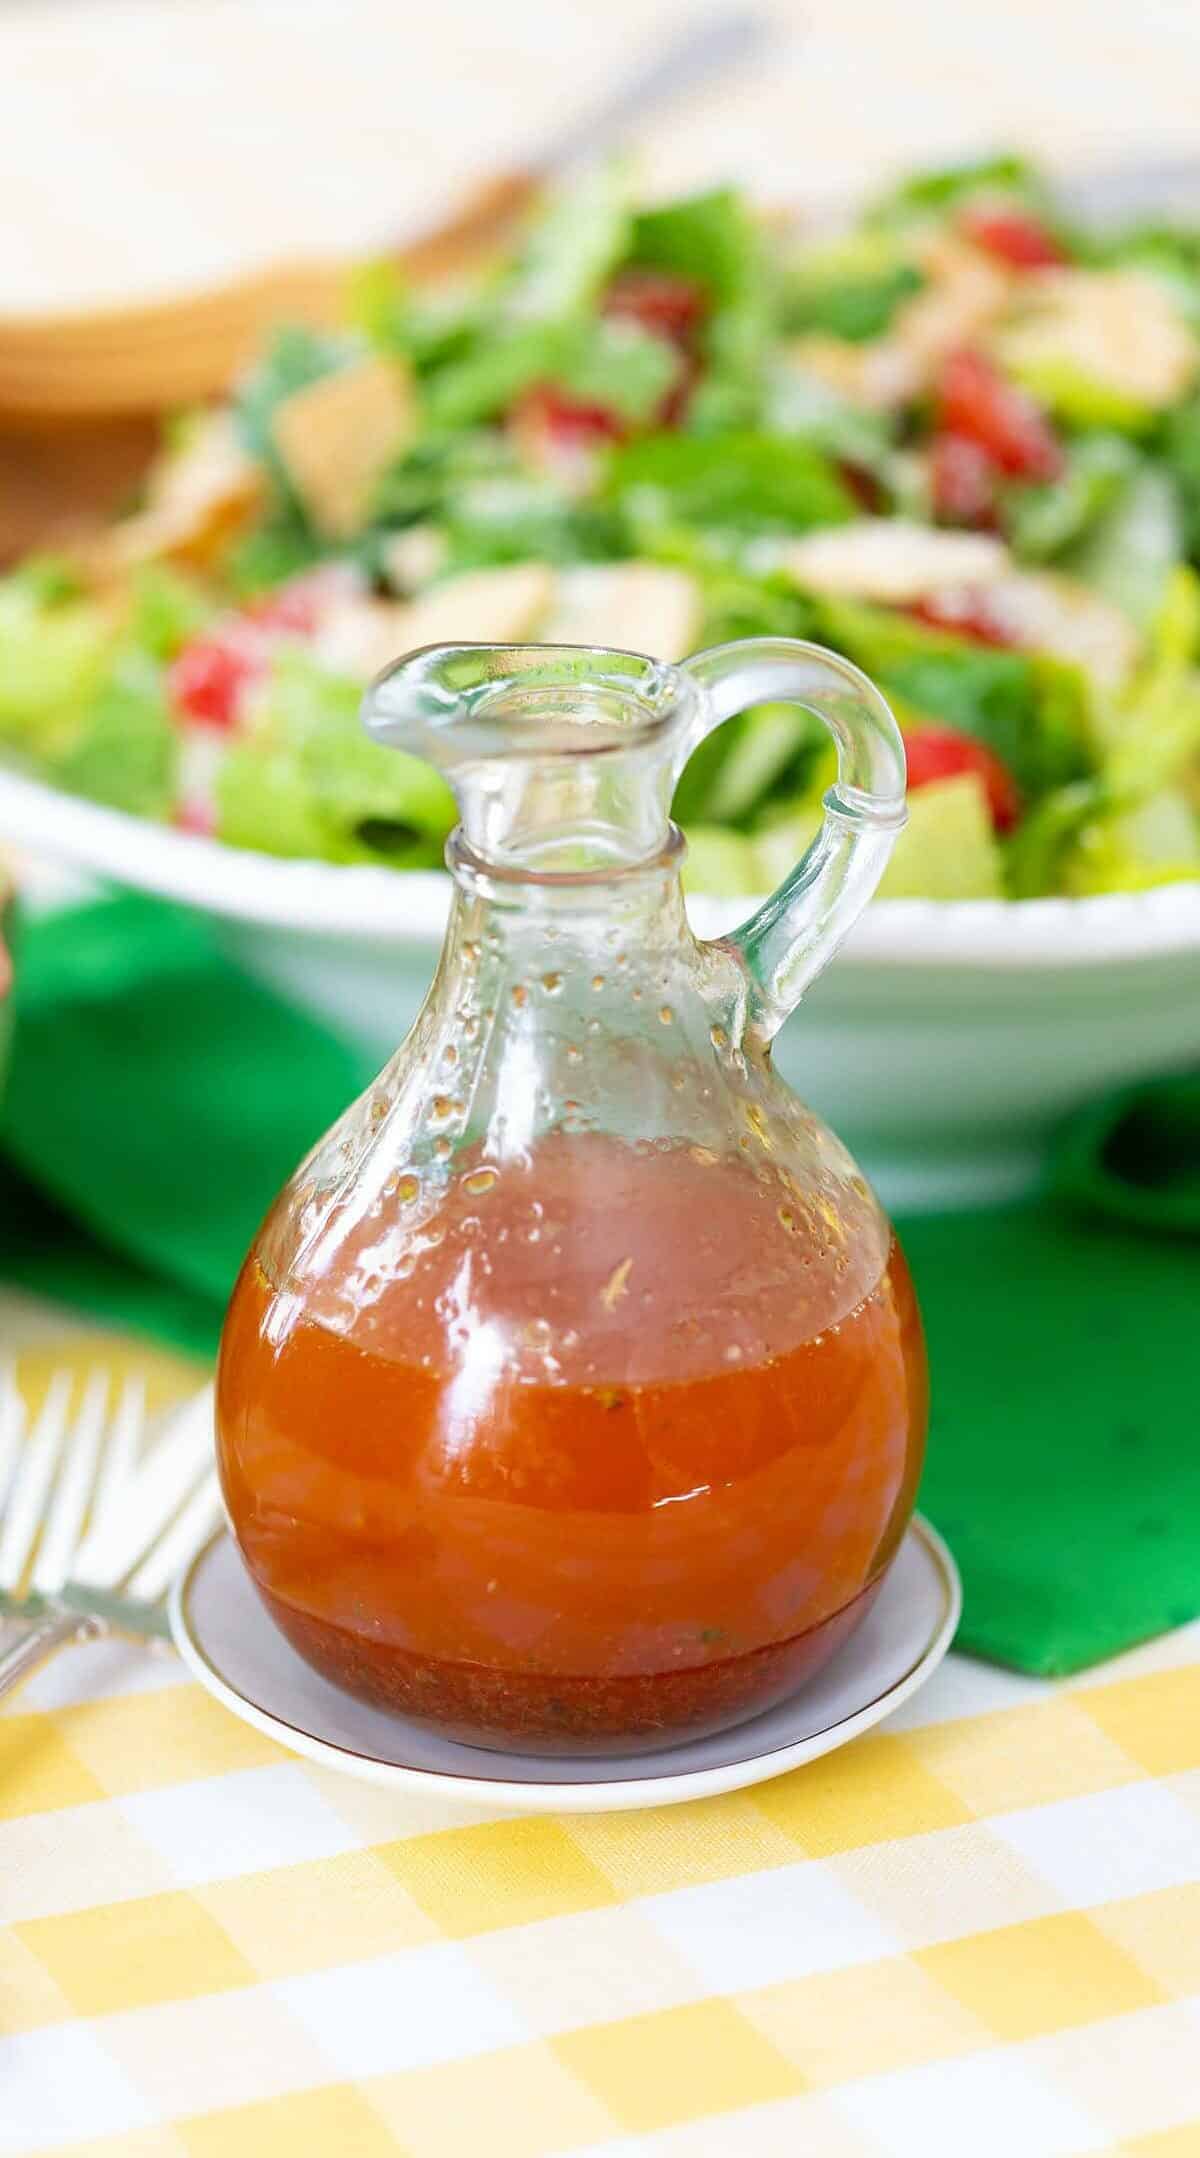  With only a few simple ingredients, this dressing is a great way to make a quick and easy dressing to jazz up any salad.